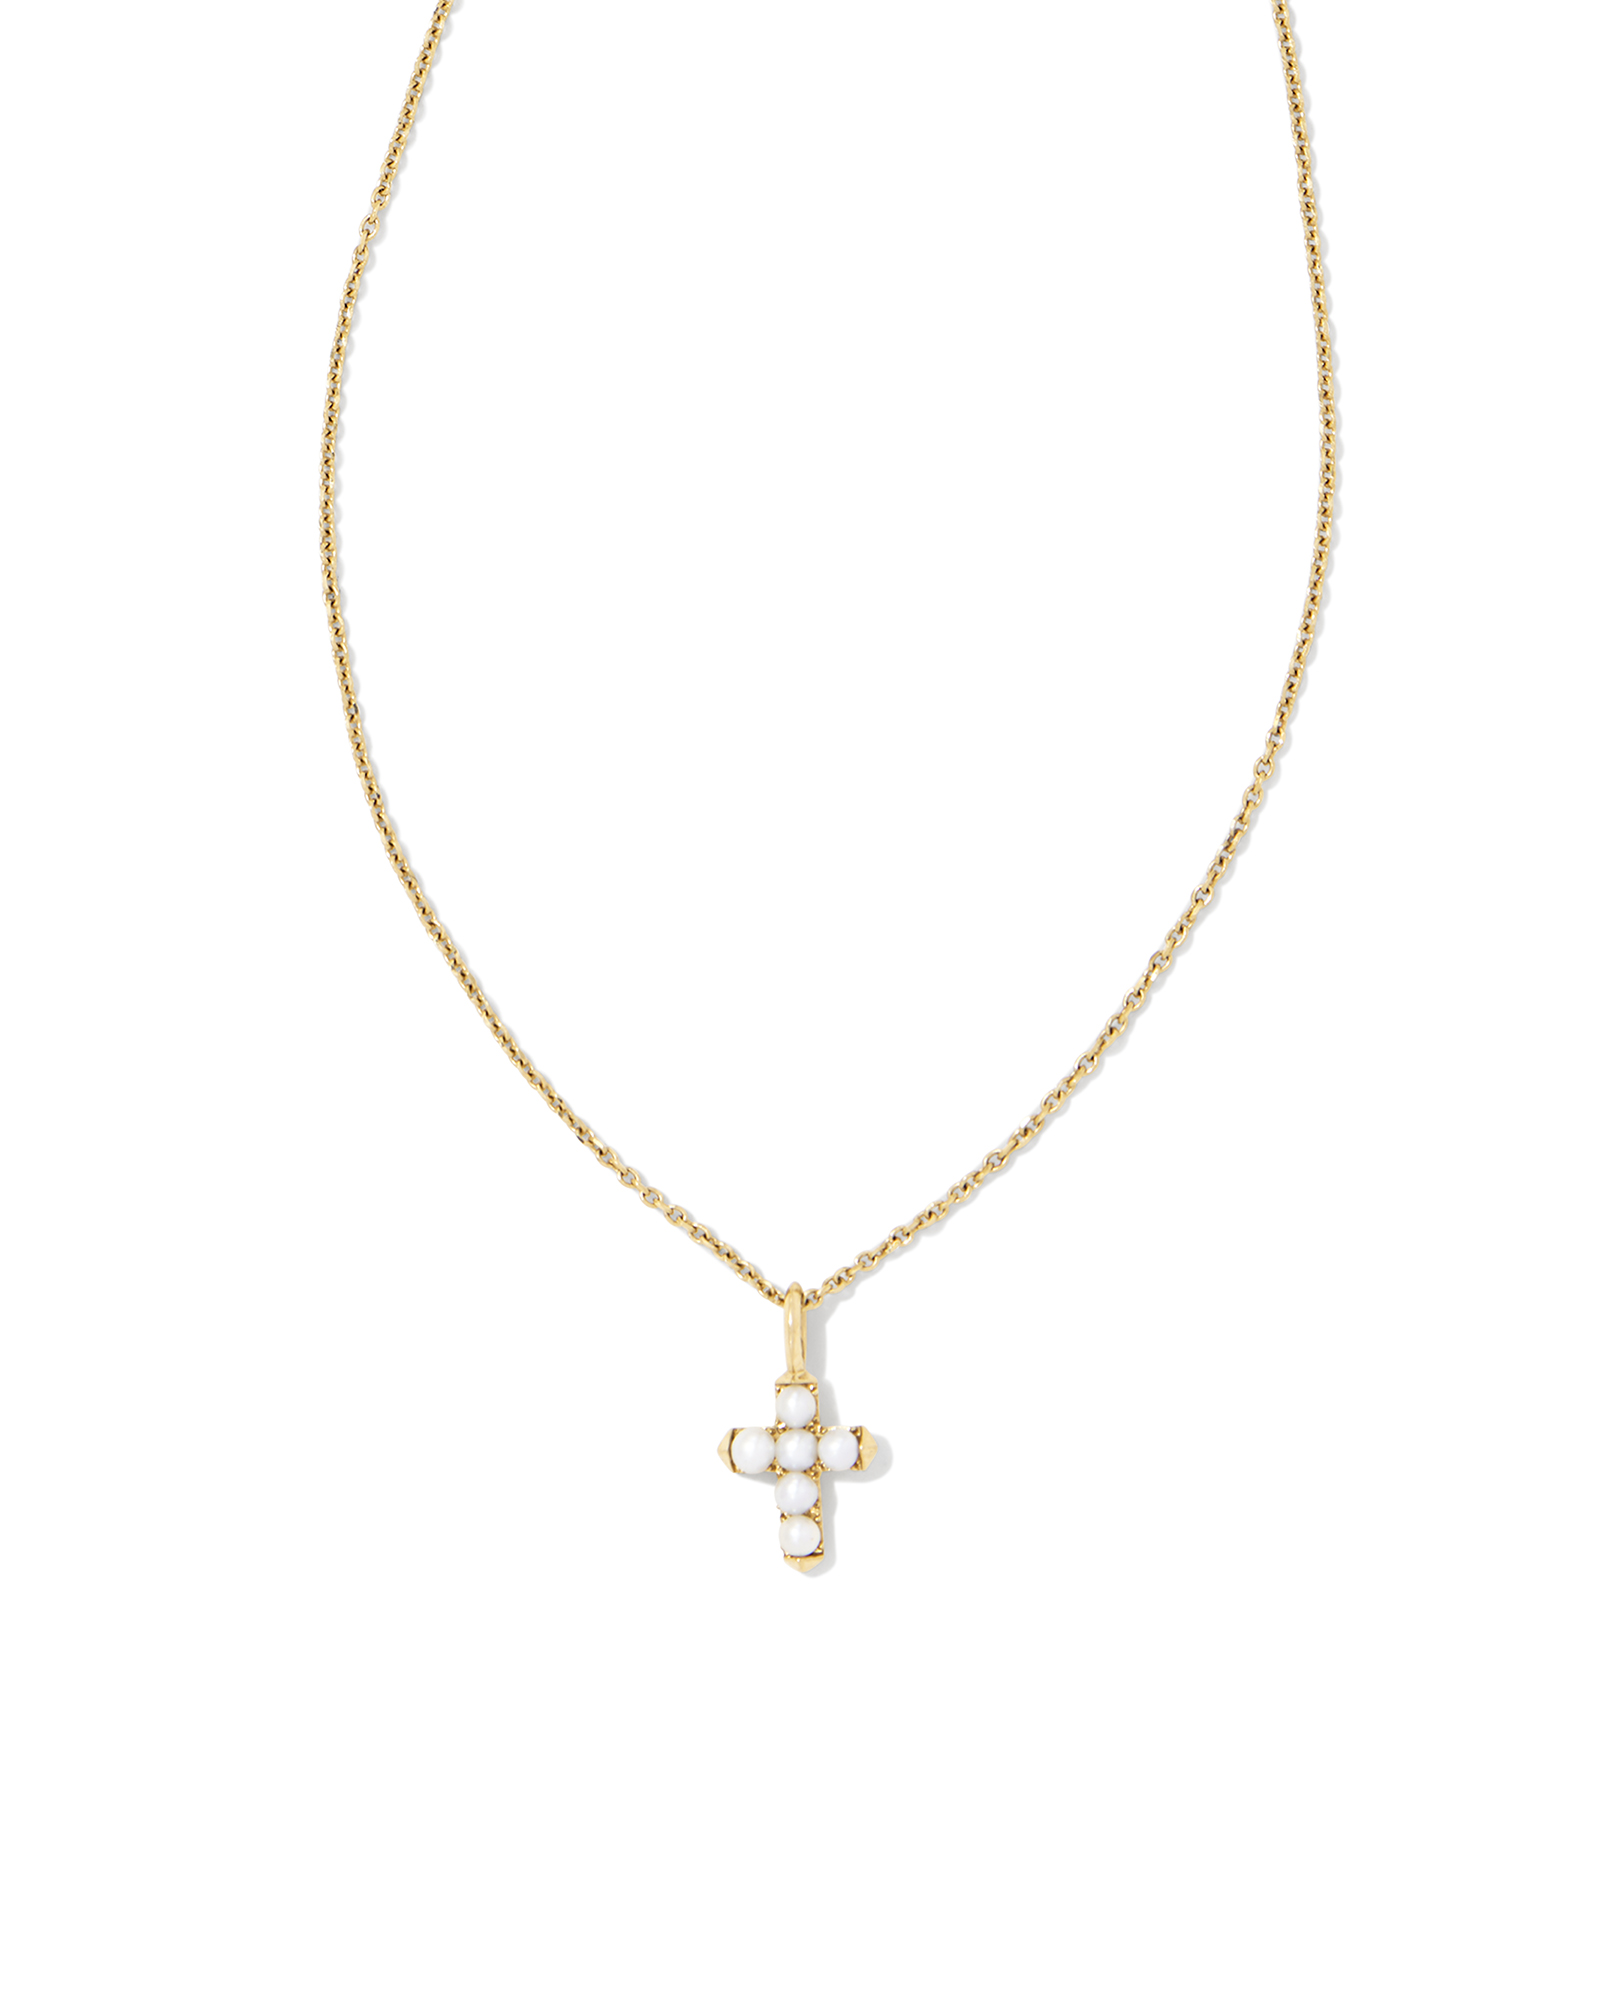 Small Gold Cross - 14-Karat Yellow Gold Cross Necklace: The King's Cro